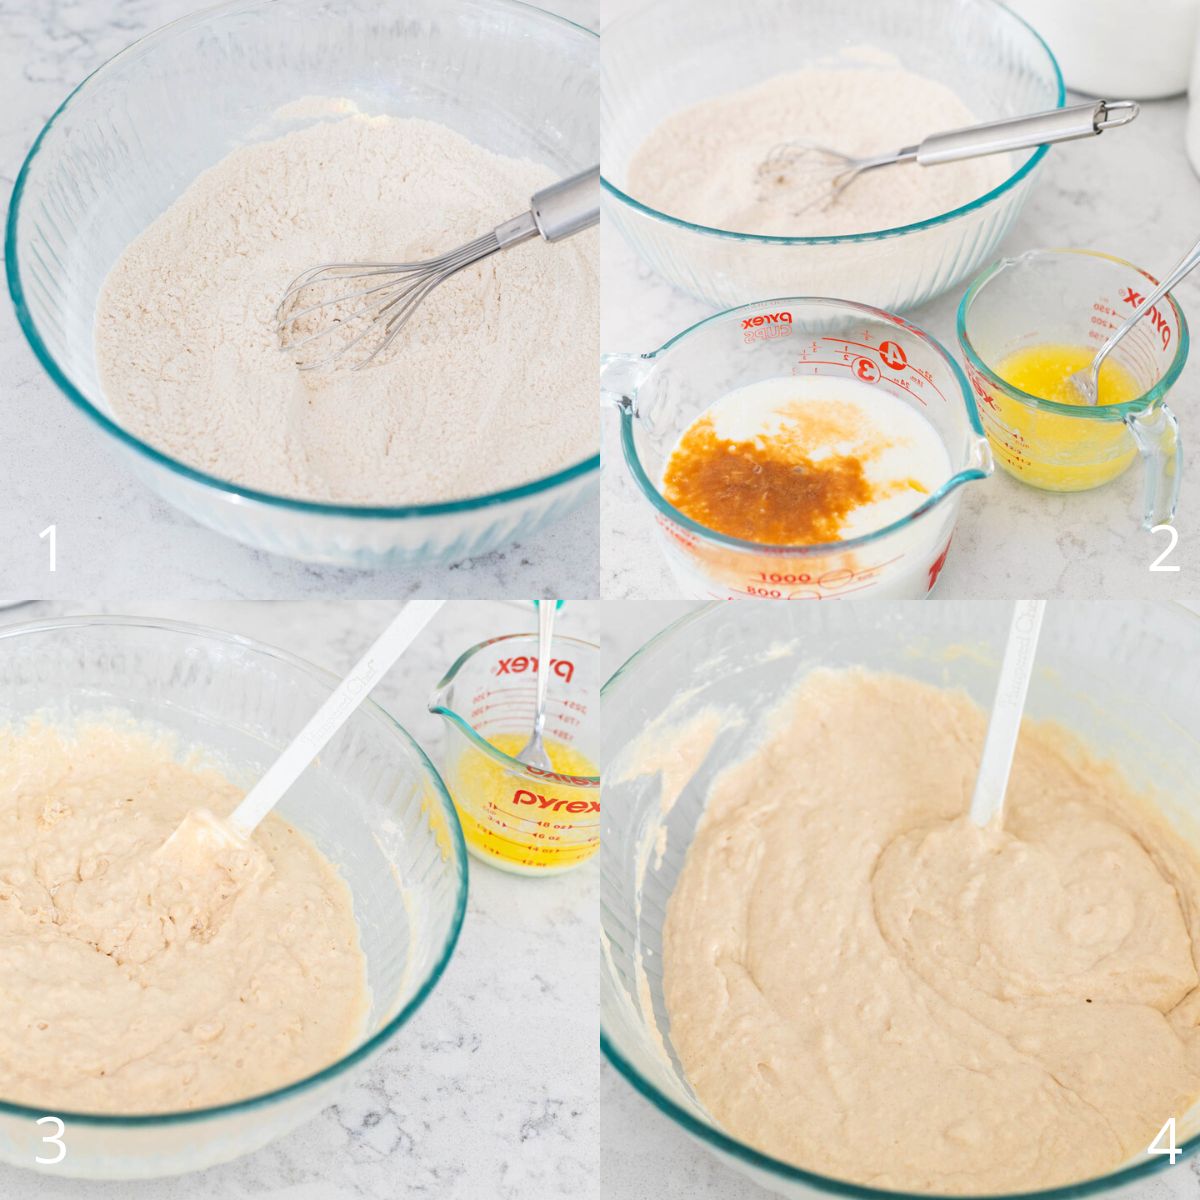 The step by step photos show how to make the waffle batter.